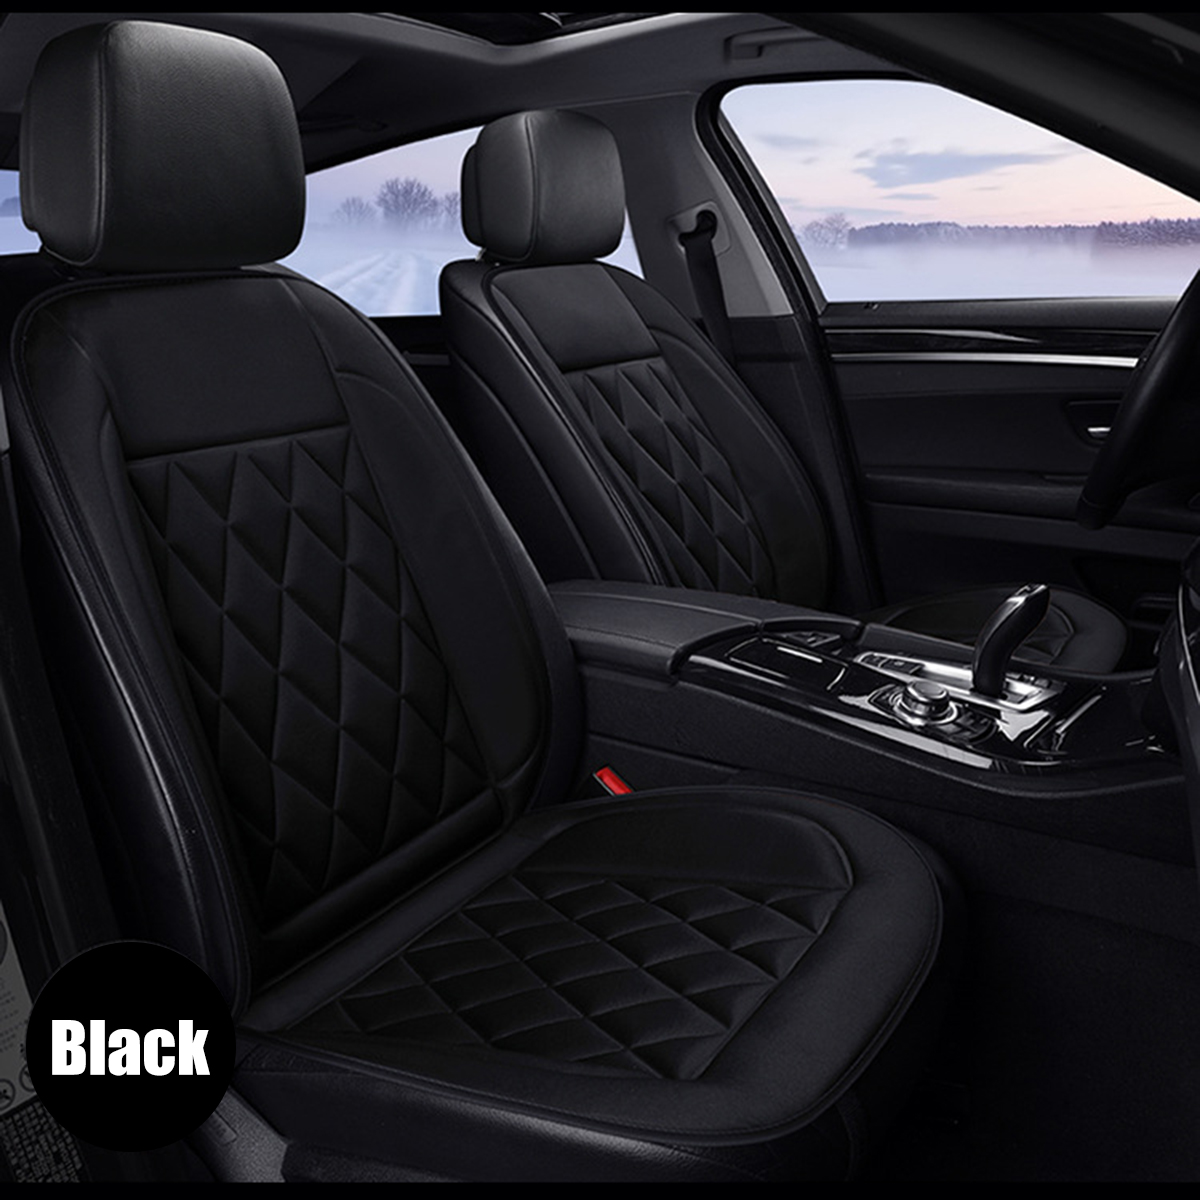 12V-20W-Polyester-Car-Front-Seat-Heated-Cushion-Seat-Warmer-Winter-Household-Cover-Electric-Mat-1419928